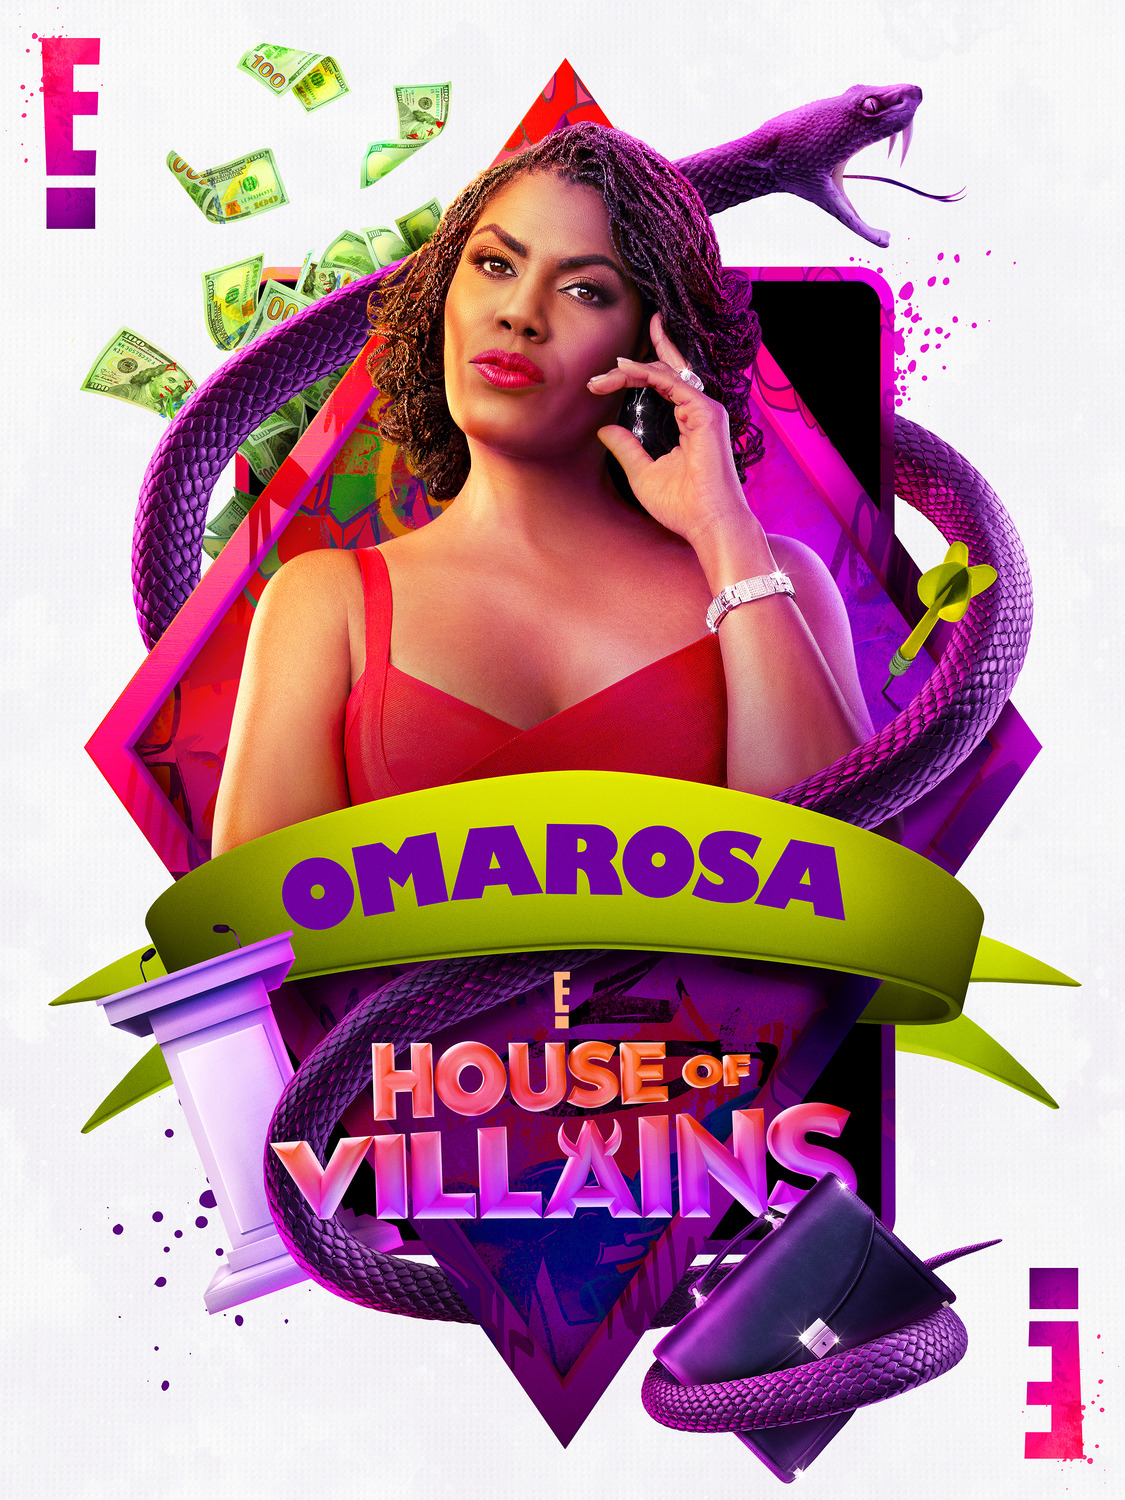 Extra Large TV Poster Image for House of Villains (#9 of 12)